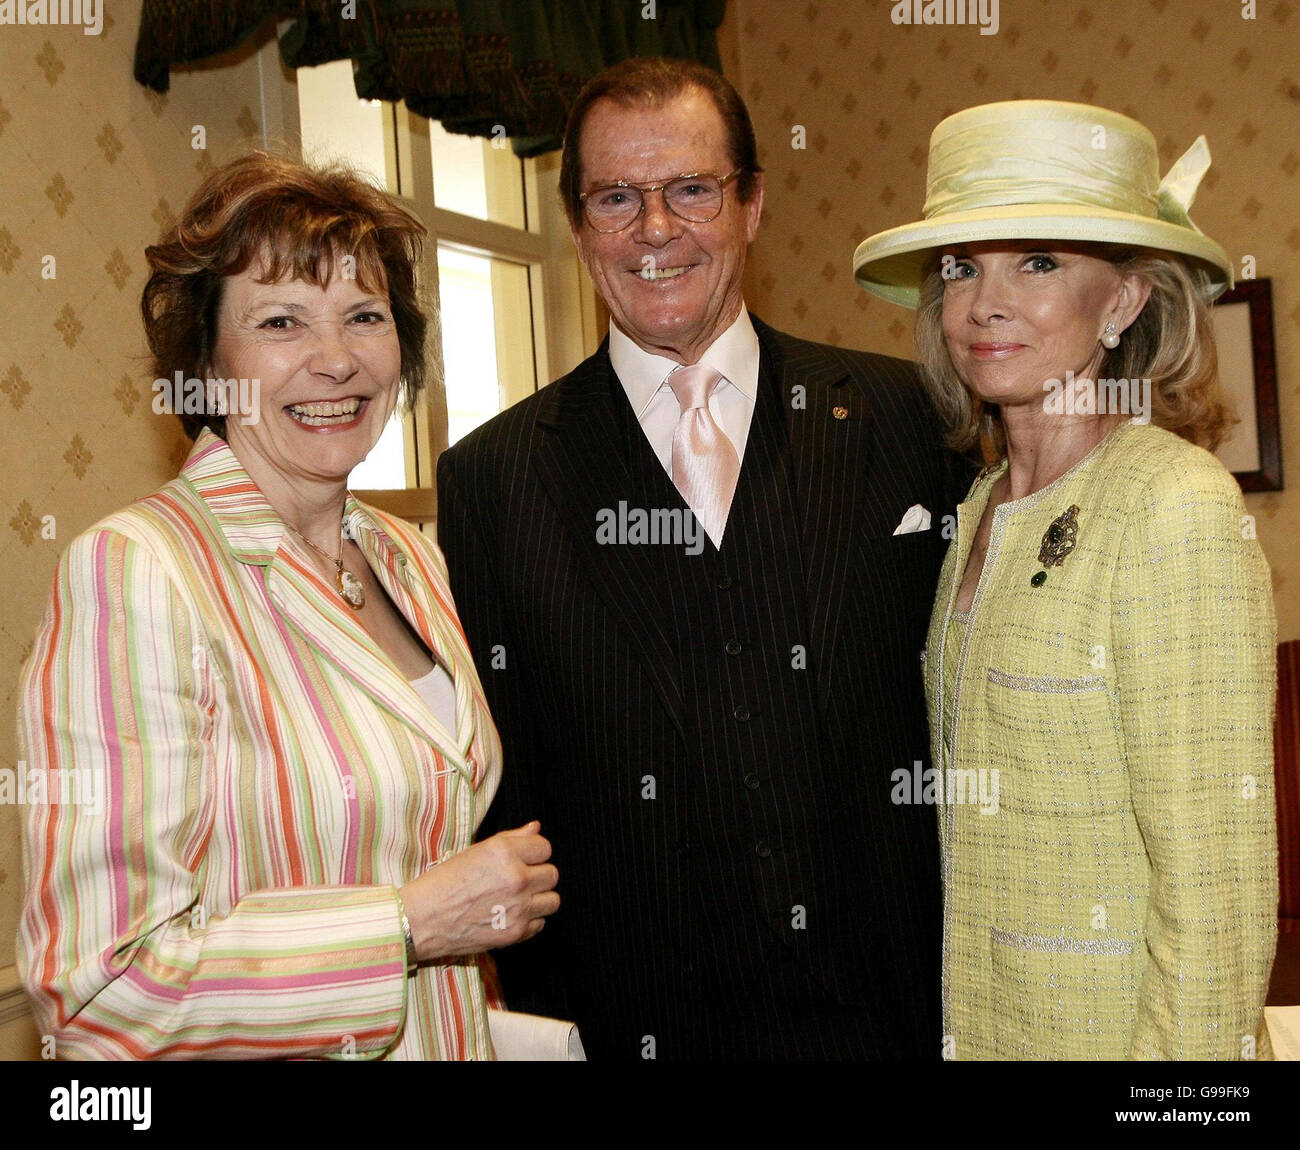 (Left to Right) Joan Bakewell, Sir Roger Moore and his wife Lady Kristina Moore arrive for the Help the Aged Living Legend Awards, at Windsor Castle, Windsor, Berkshire. PRESS ASSOCIATION Photo. Picture Date: Wednesday 3 May 2006. The awards pay tribute to older people who have made a difference to their community. PRESS ASSOCIATION Photo. Photo credit should read: Hugo Philpott/PA Stock Photo